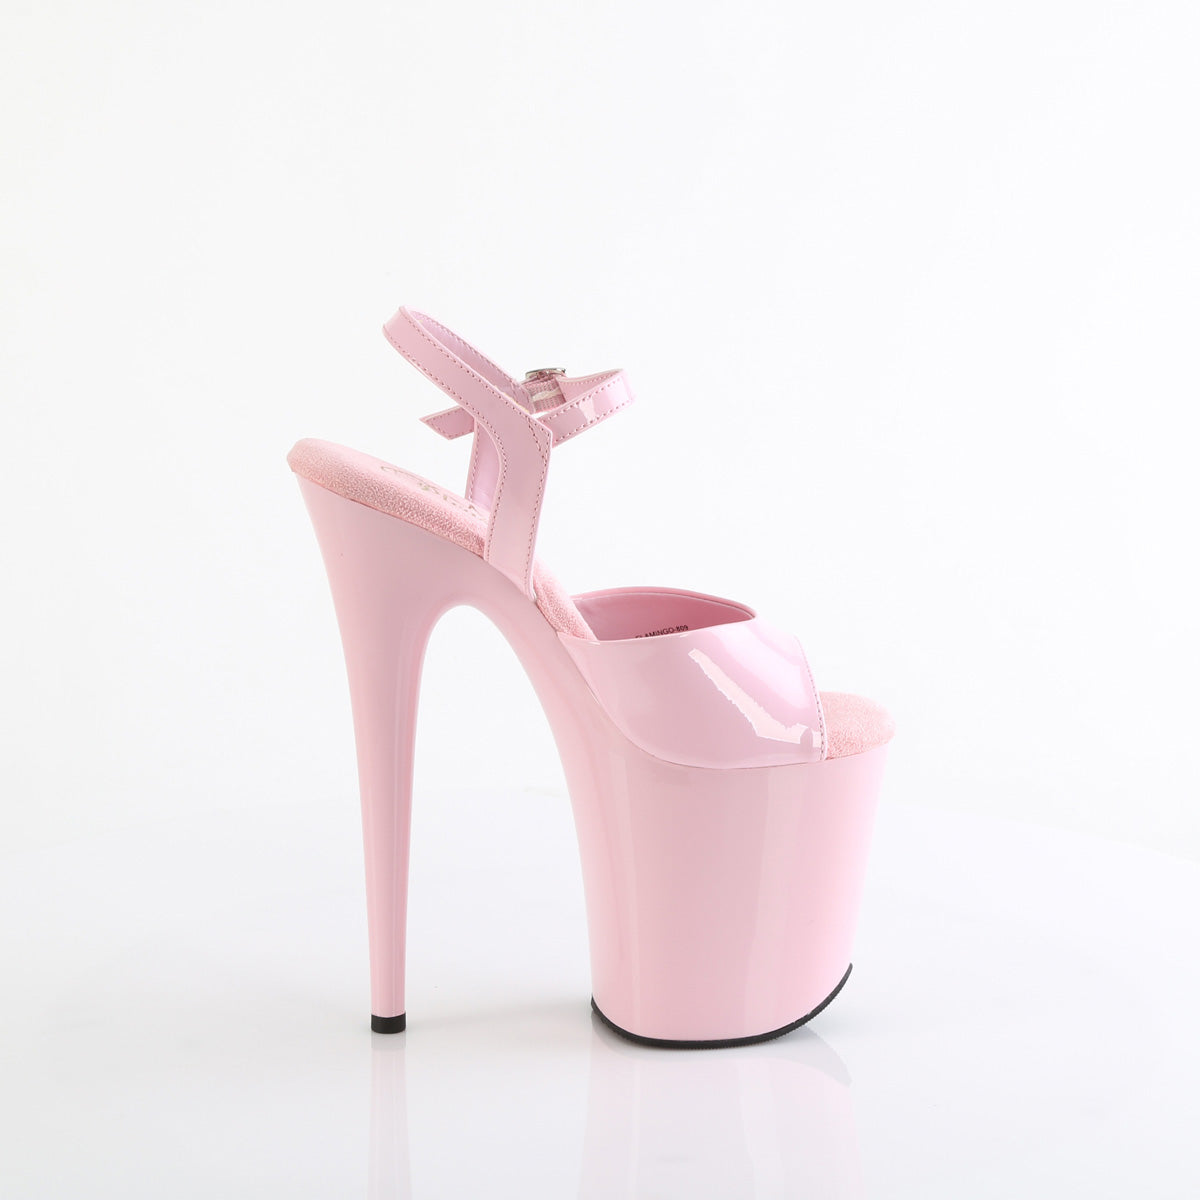 FLAMINGO-809/BP/M 8" PLEASER FAST DELIVERY 24-48h